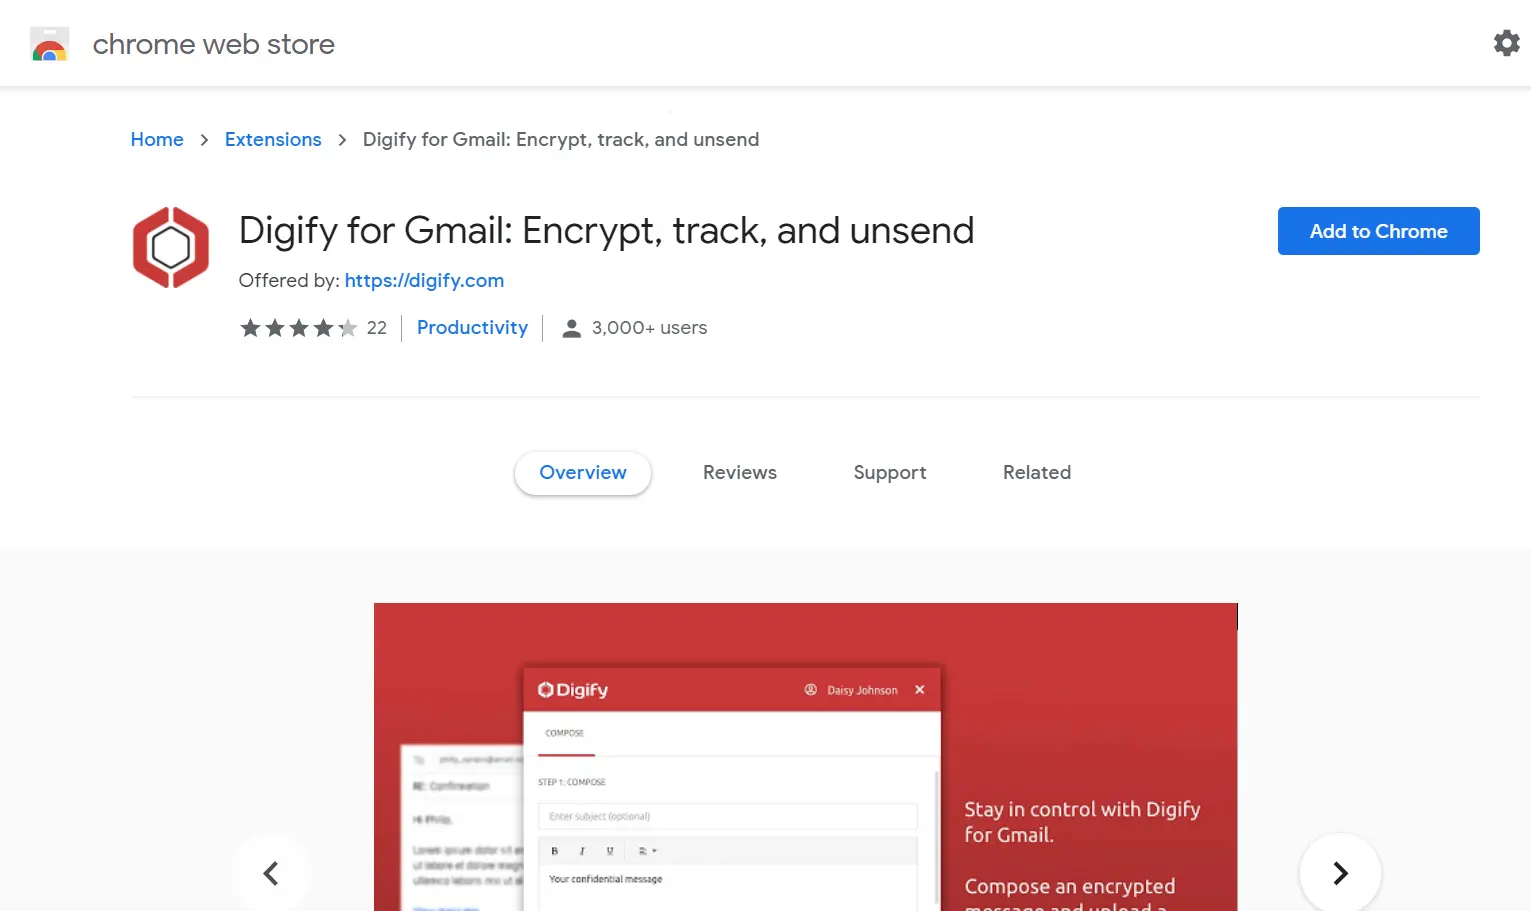 Digify for Gmail